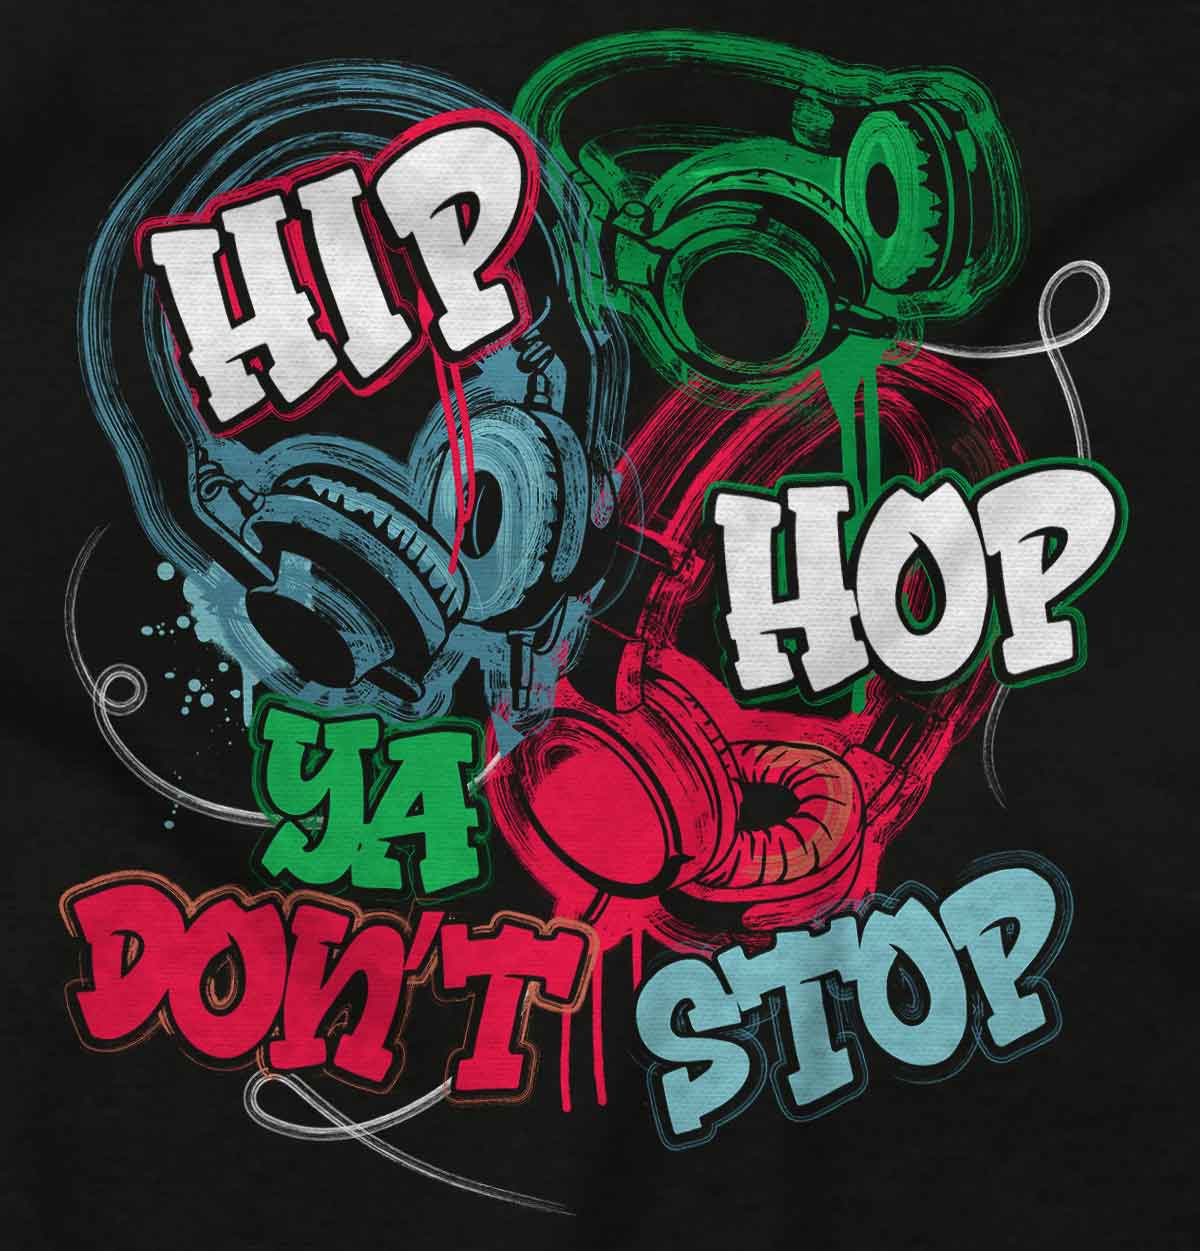 Experience the world of street art with this captivating graffiti piece. Featuring the words "Hip Hop Ya, Don't Stop!" it embraces urban culture and exudes rhythm and style.